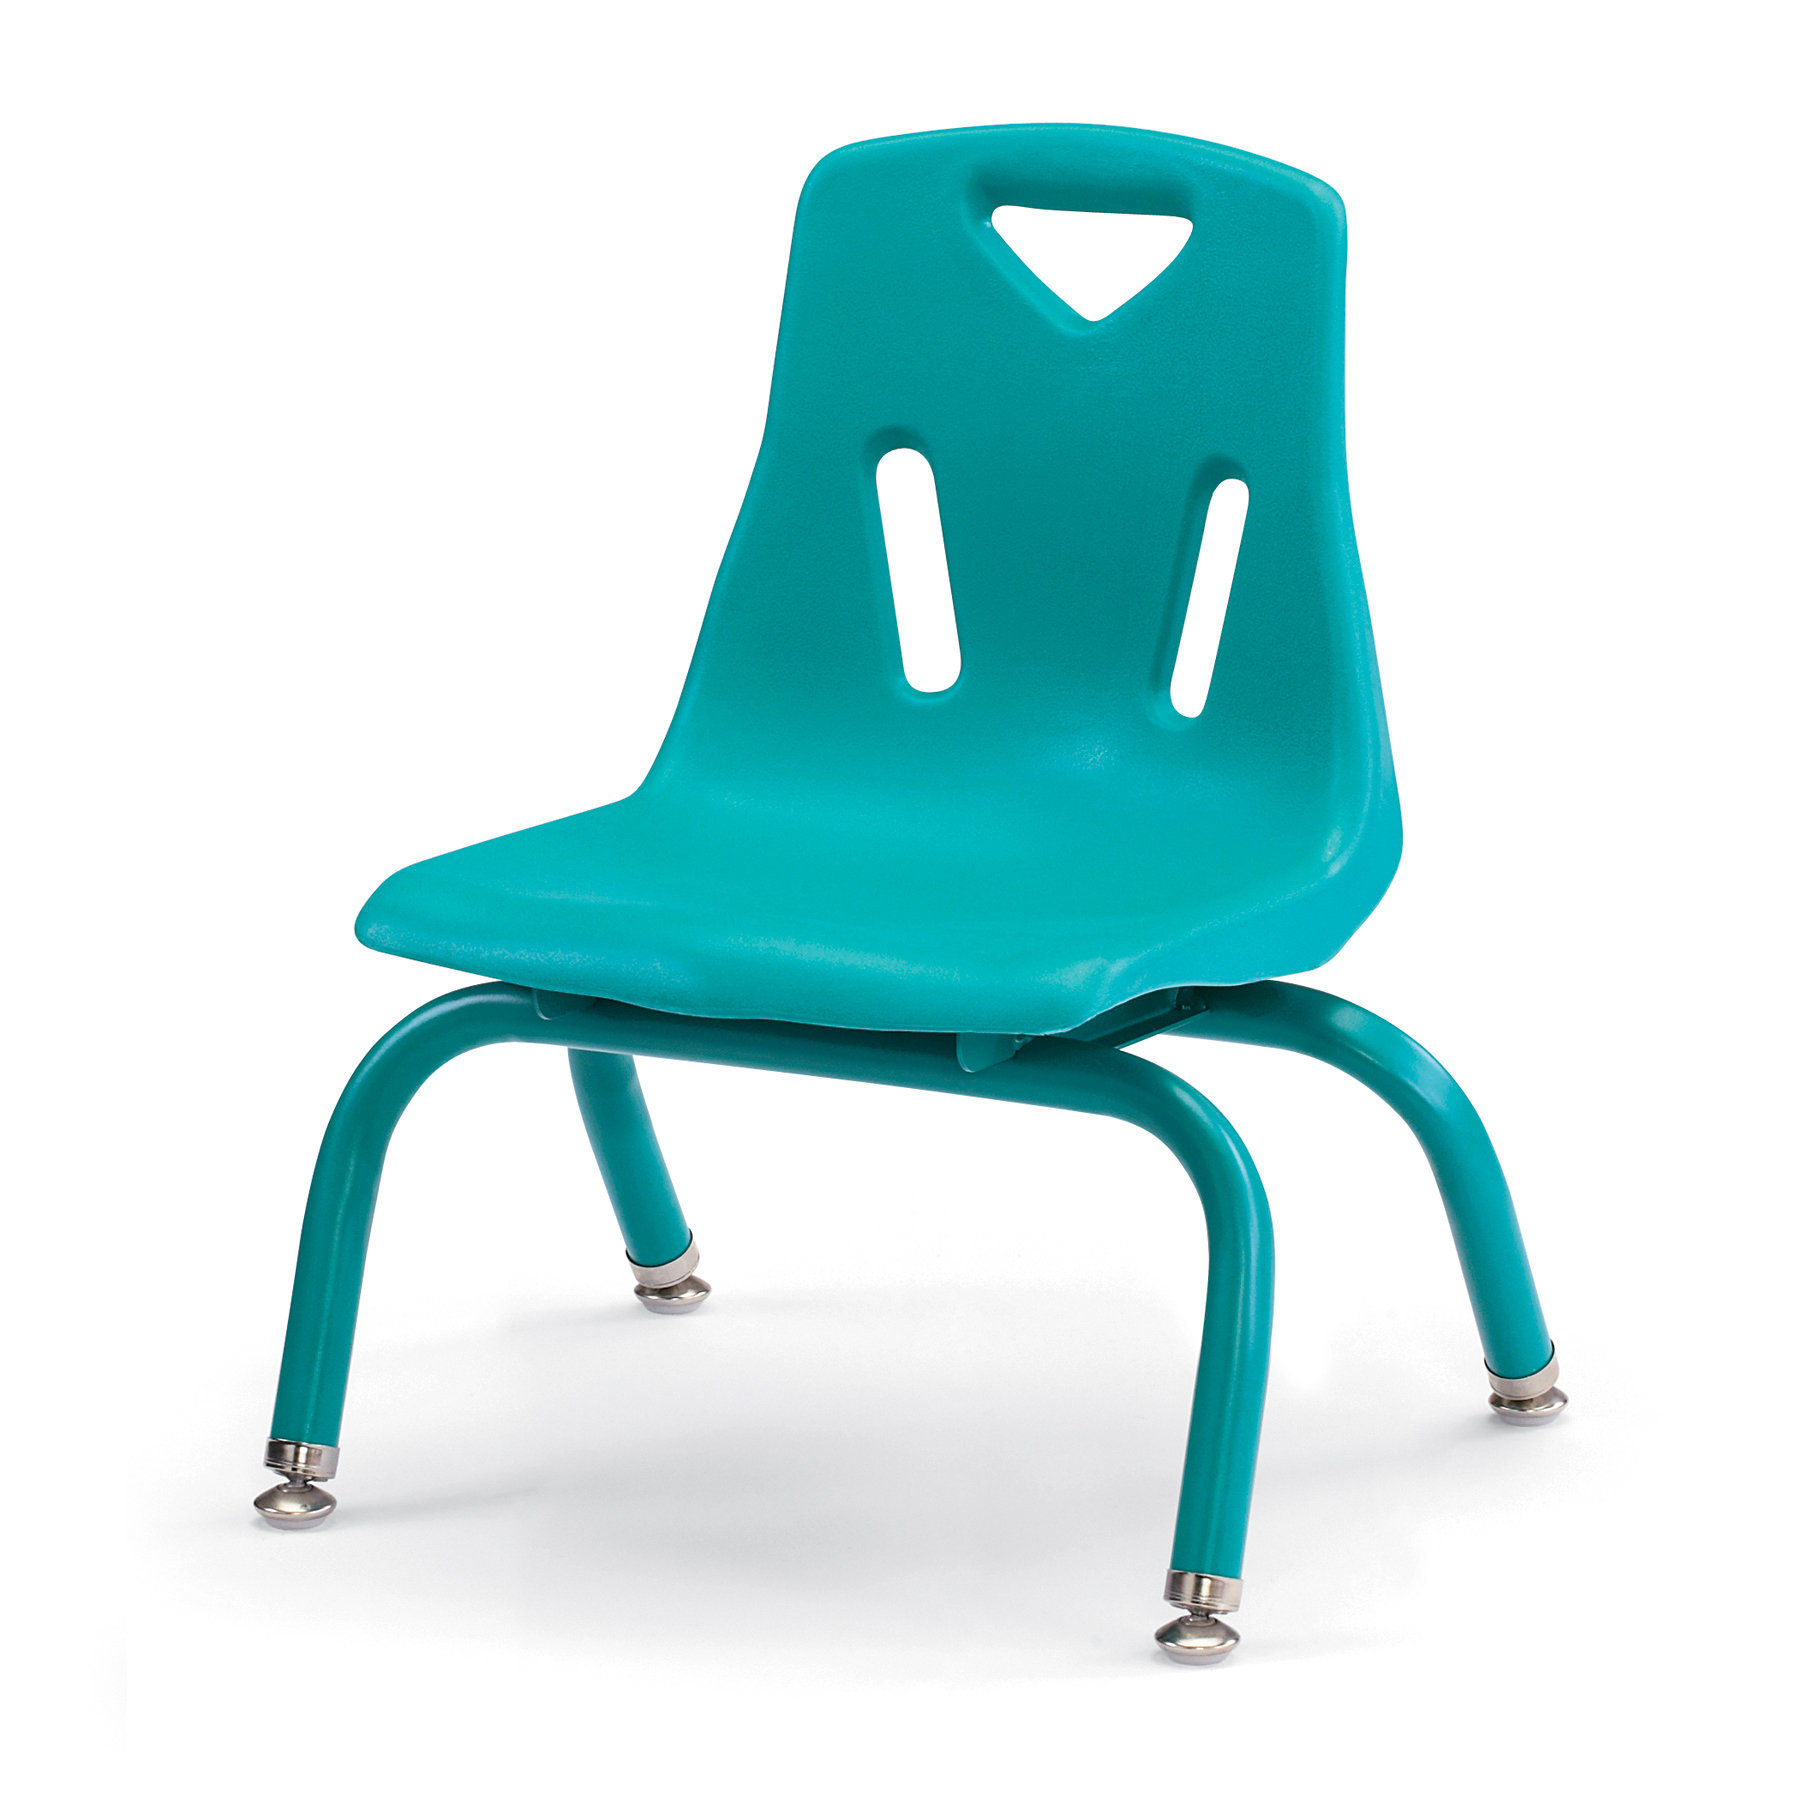 10 Height Teal Pack of 6 Jonti-Craft 8120JC6005 Berries Stacking Chairs with Powder-Coated Legs 